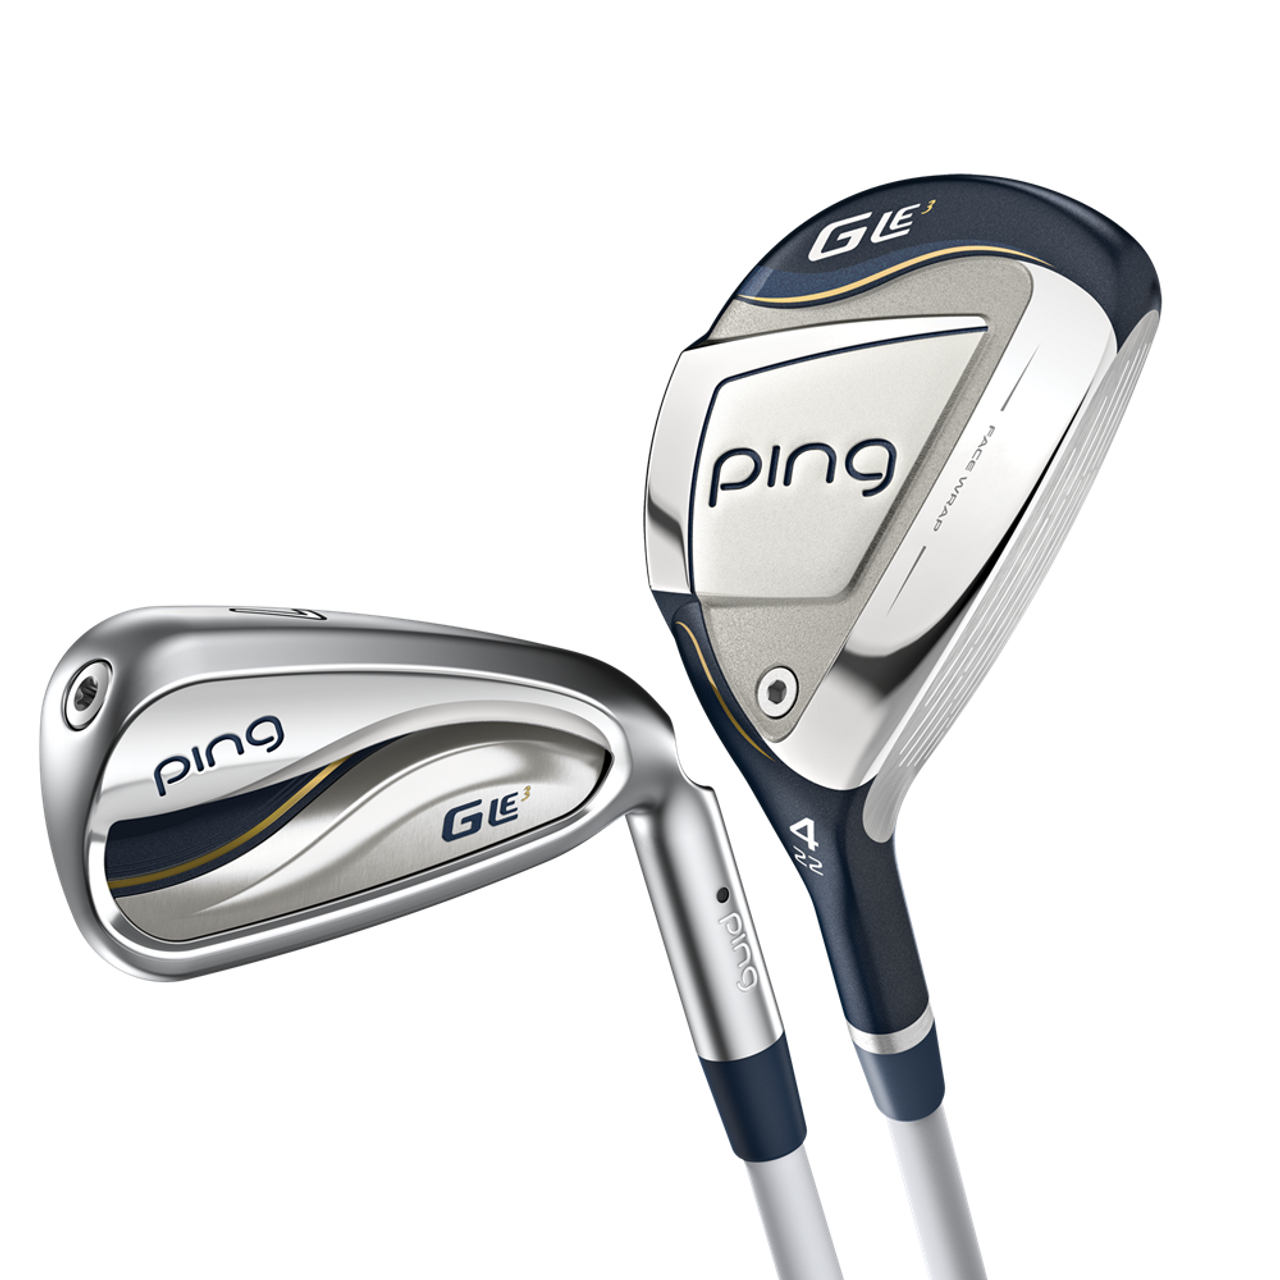 PING Golf - Women's G Le3 Irons